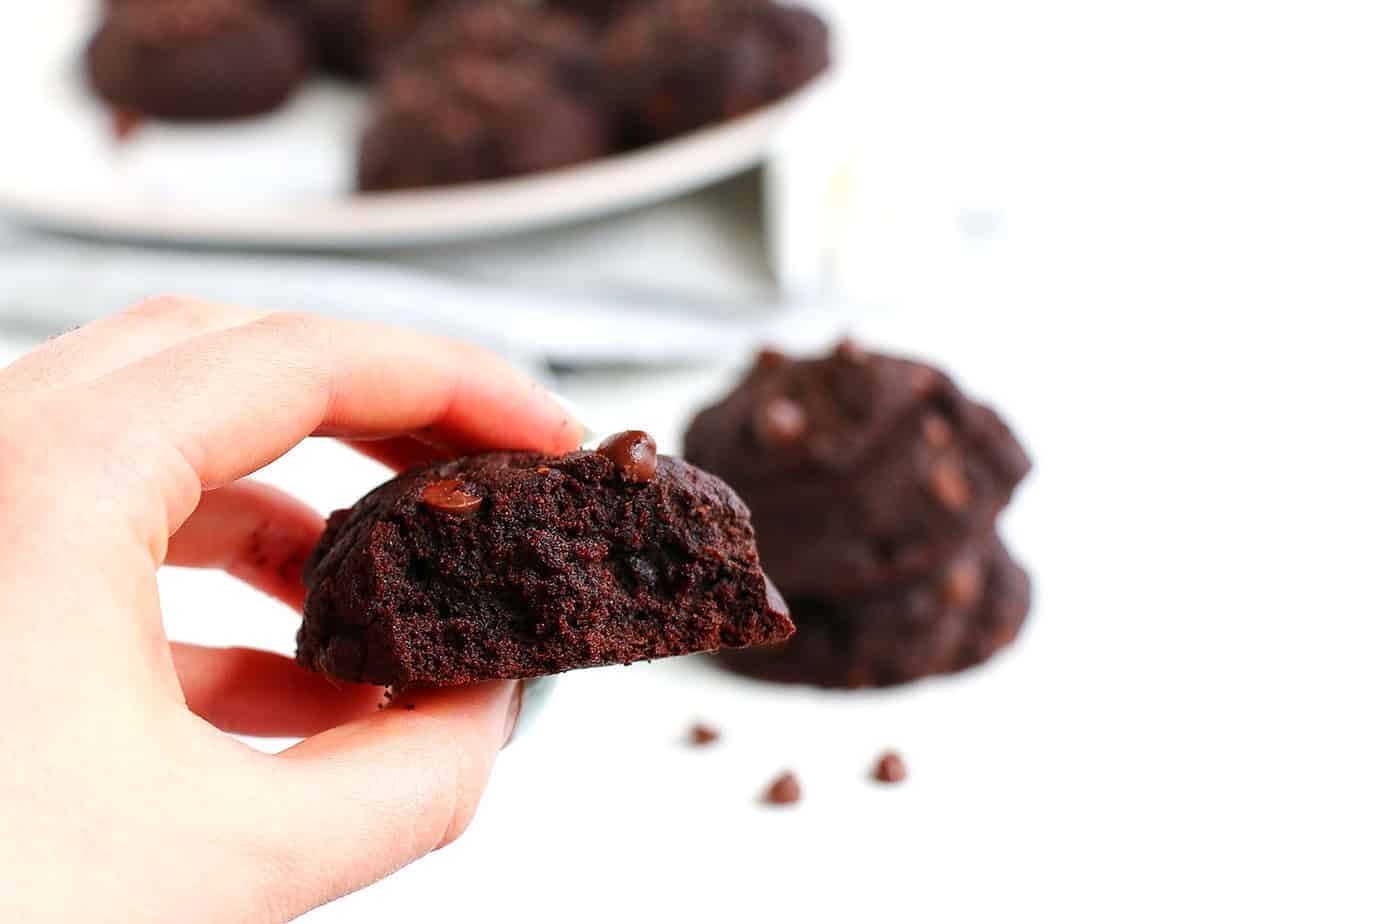 Healthy Double Chocolate Cookies - Delicious and decadent cookies that are vegan, gluten free, refined sugar free and made with coconut oil.